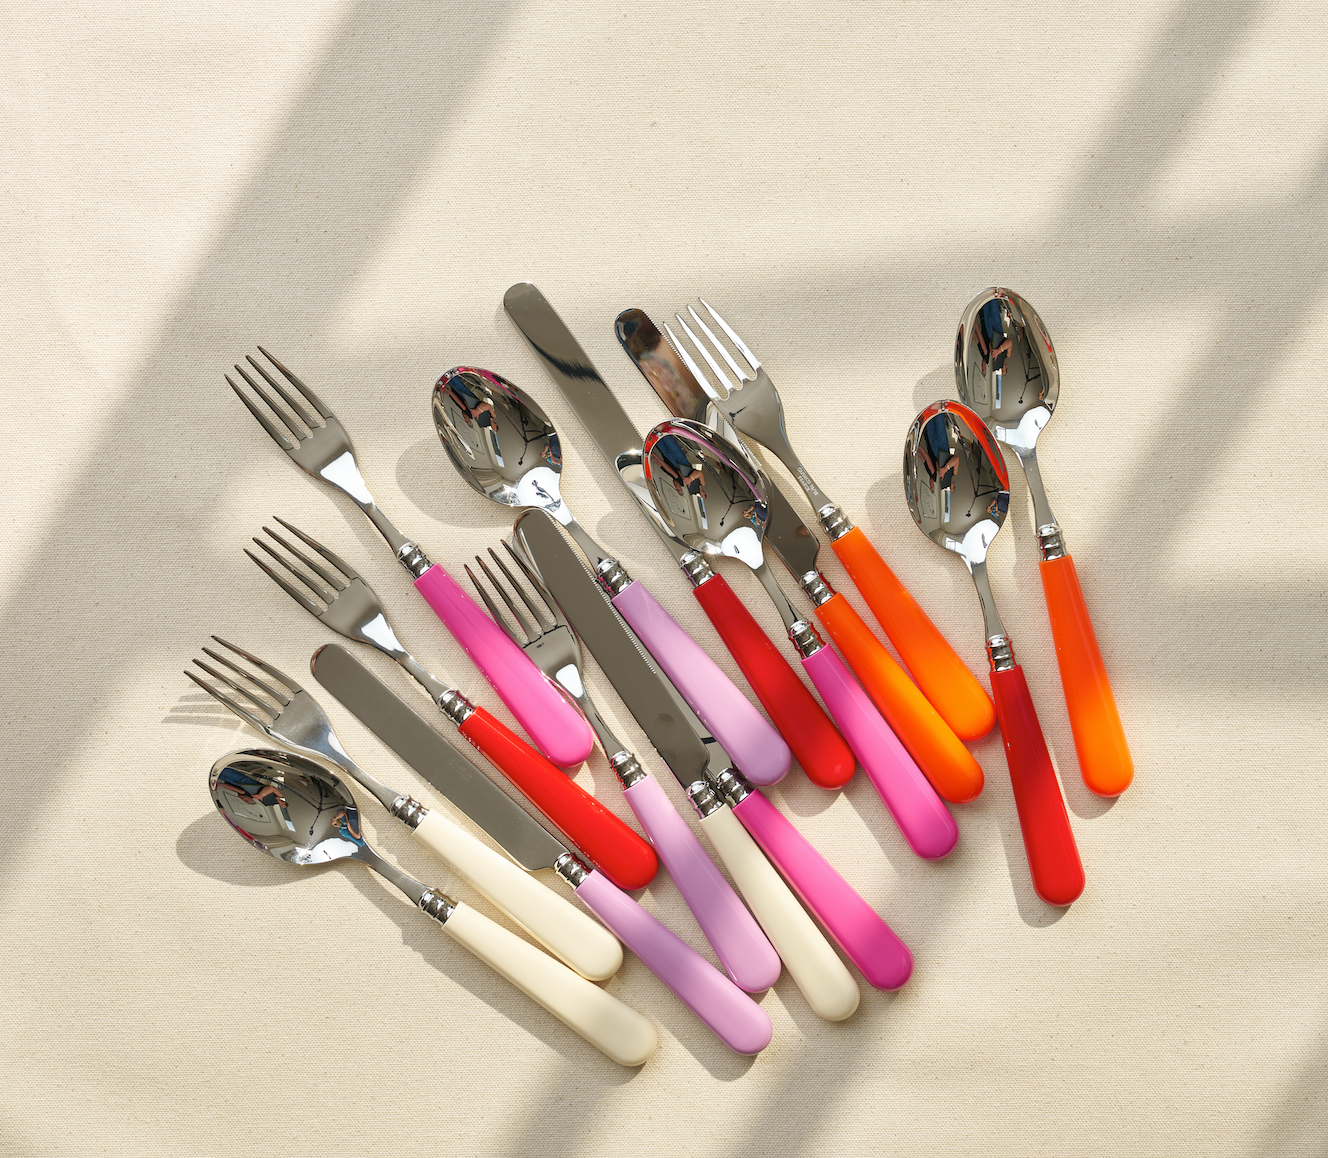 Rose Pale Cutlery in Stainless Steel